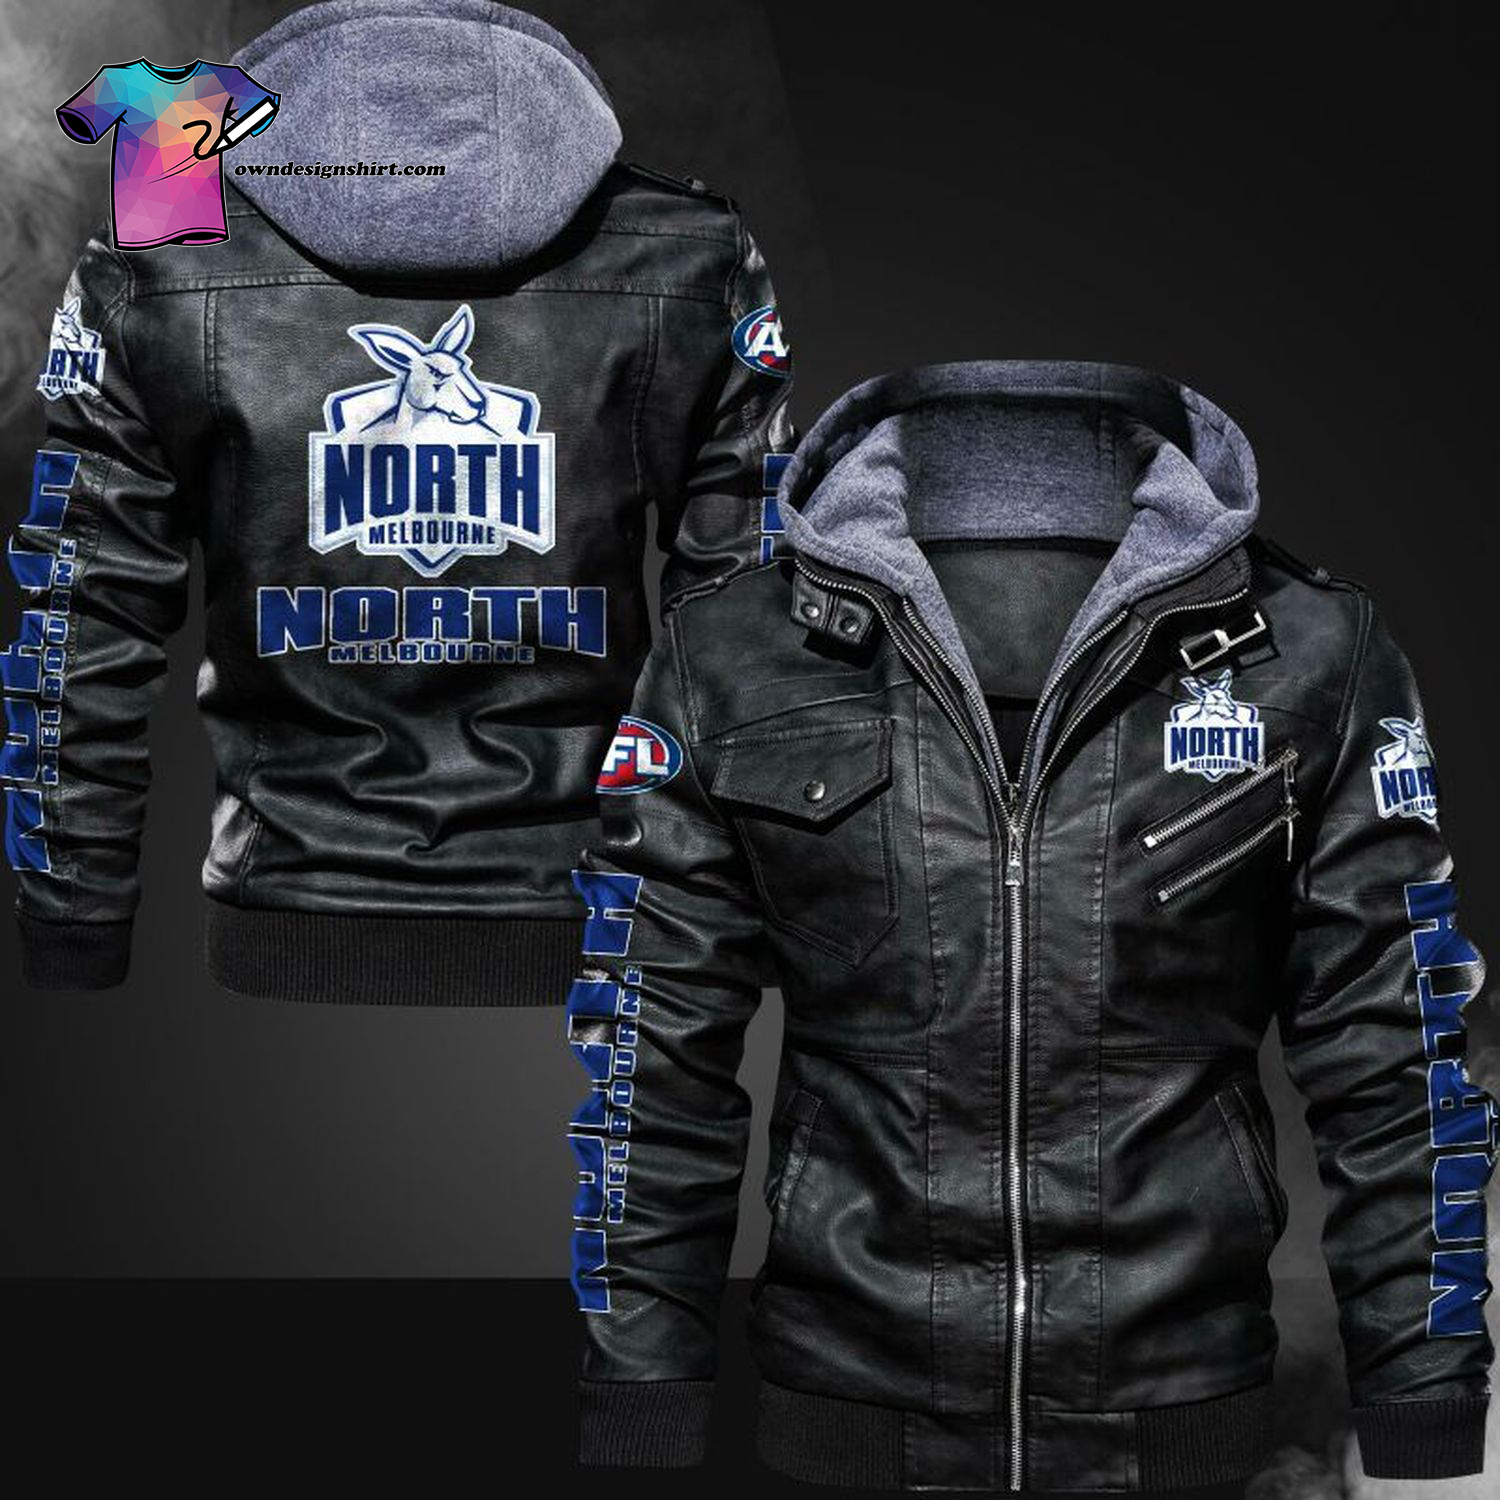 [The best selling] North Melbourne Football Club Leather Jacket